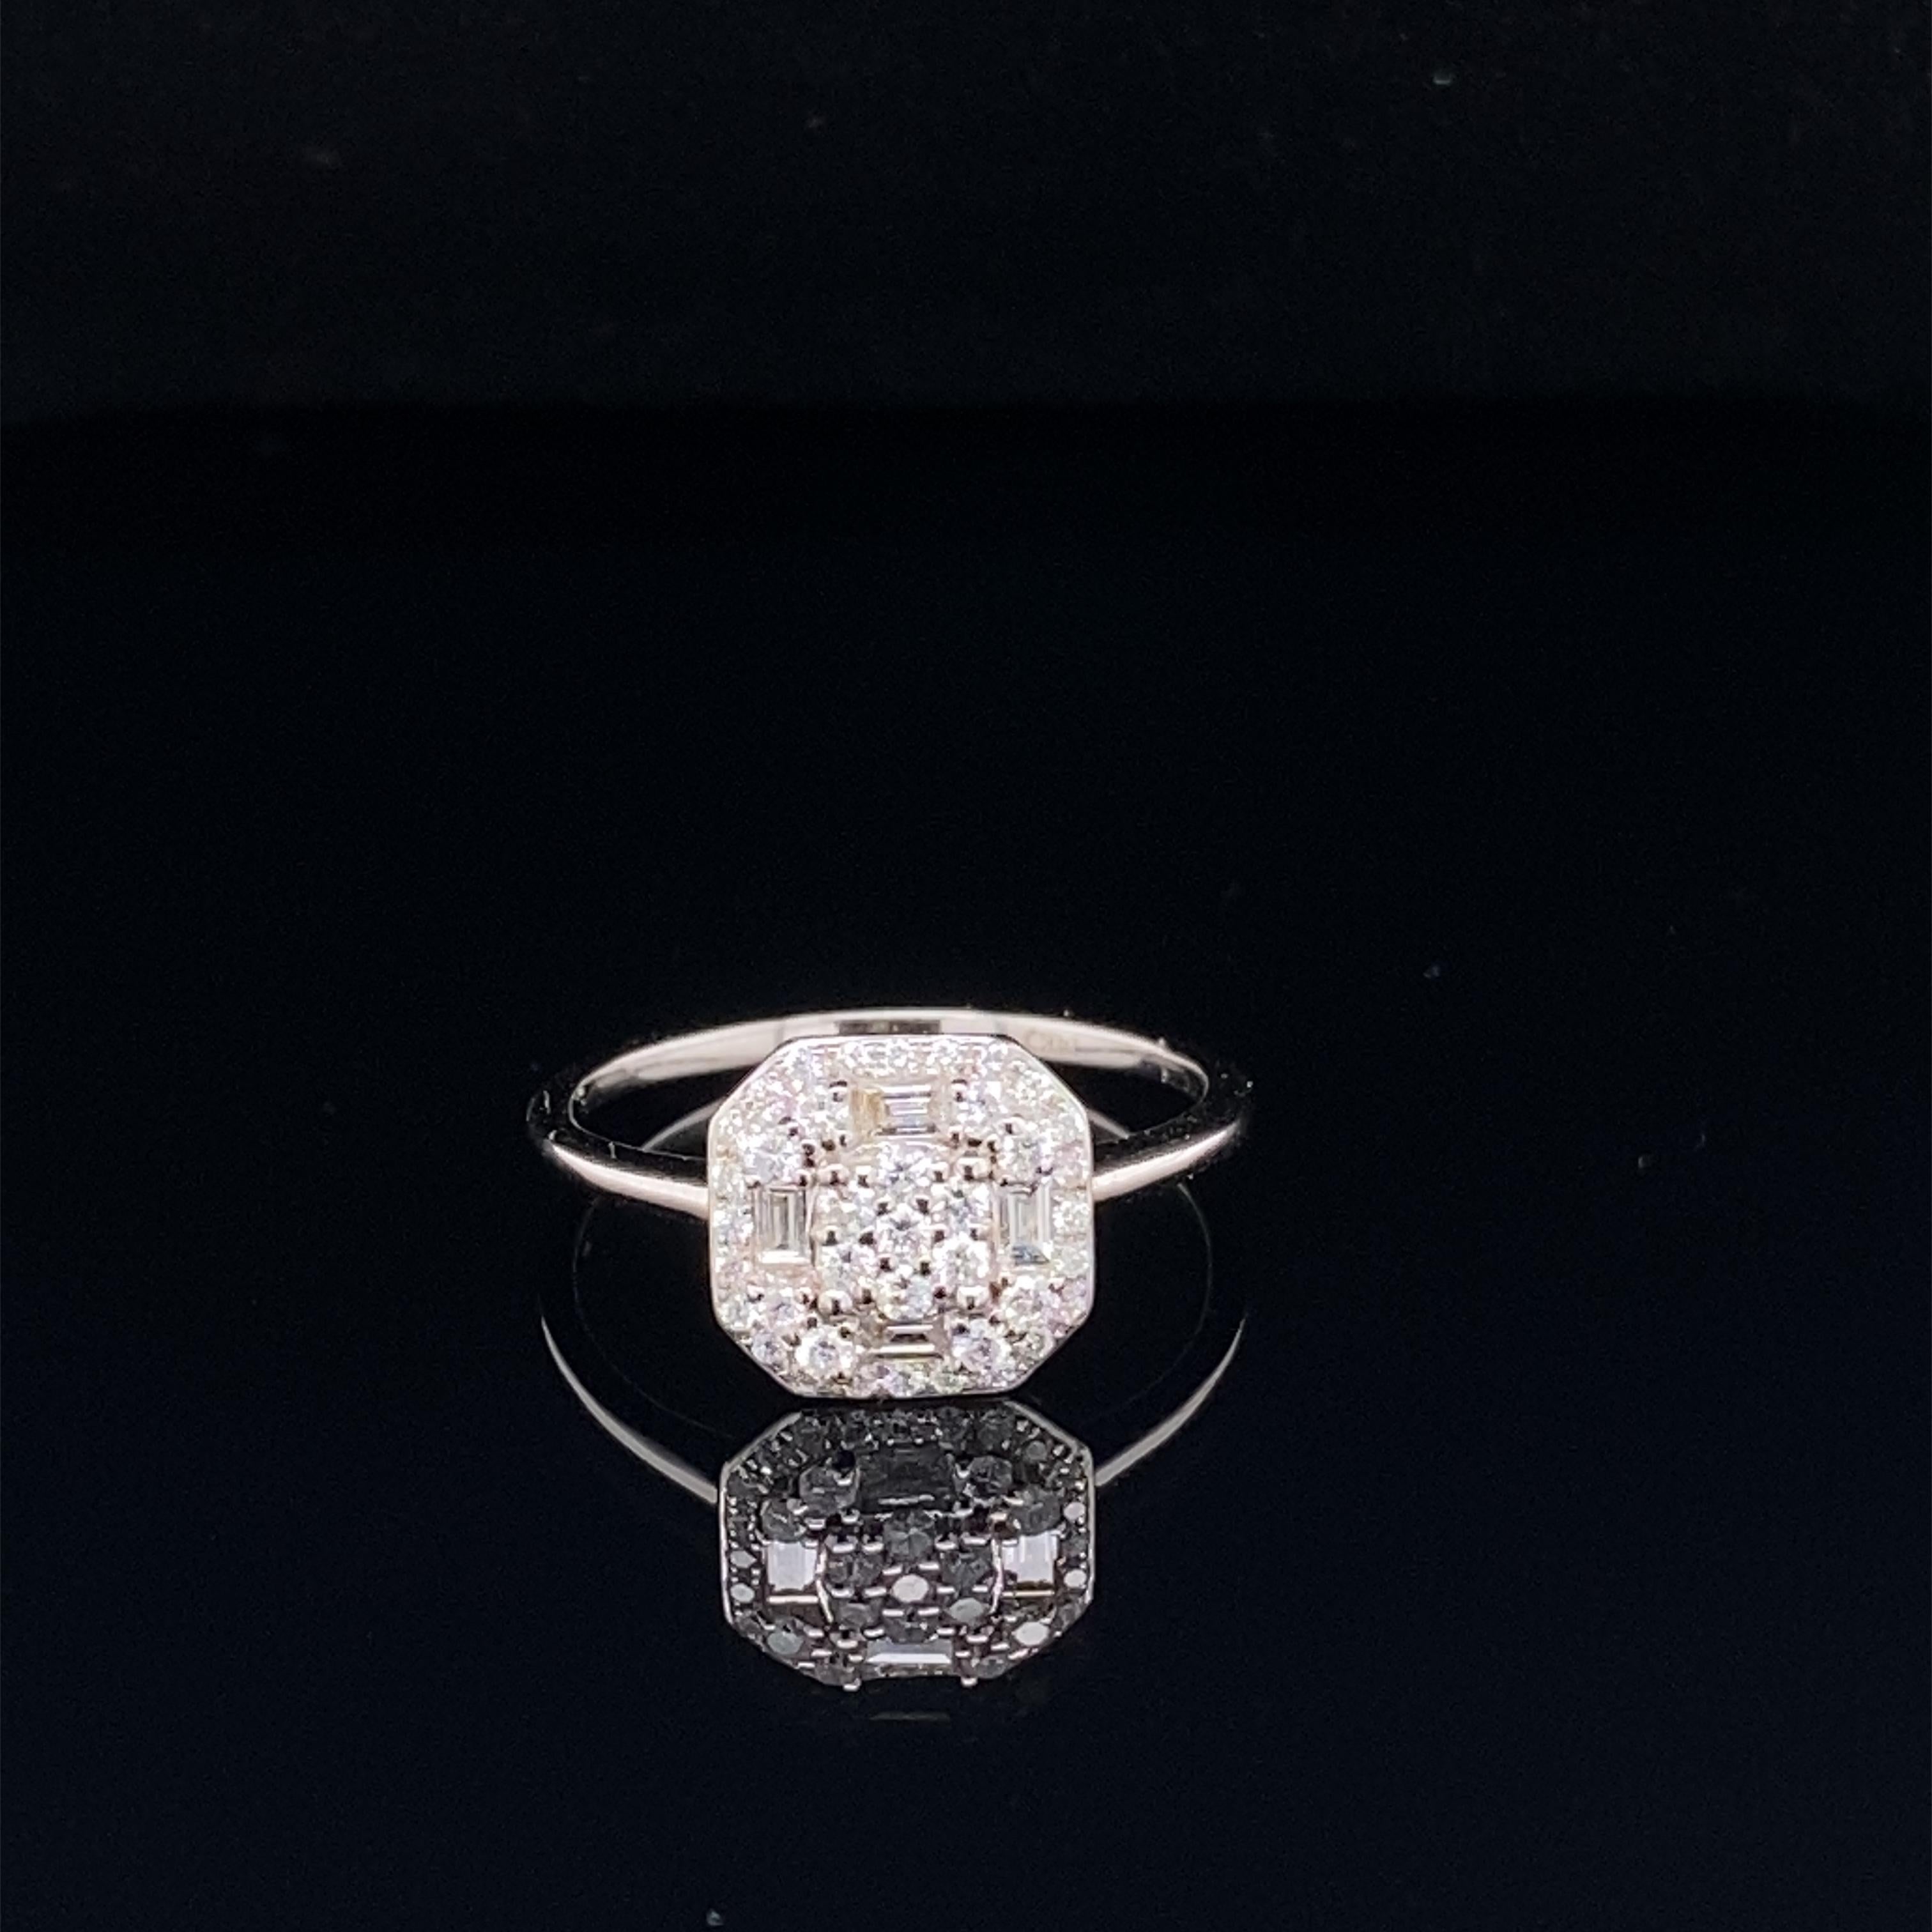 This stunning ring features a beautiful Cushion Cluster of White Diamonds comprising of Baguette and Round Diamonds.
This ring is set in 18K White Gold.
Total Diamond Weight = 0.42 Carats. Ring Size is 6 1/2.